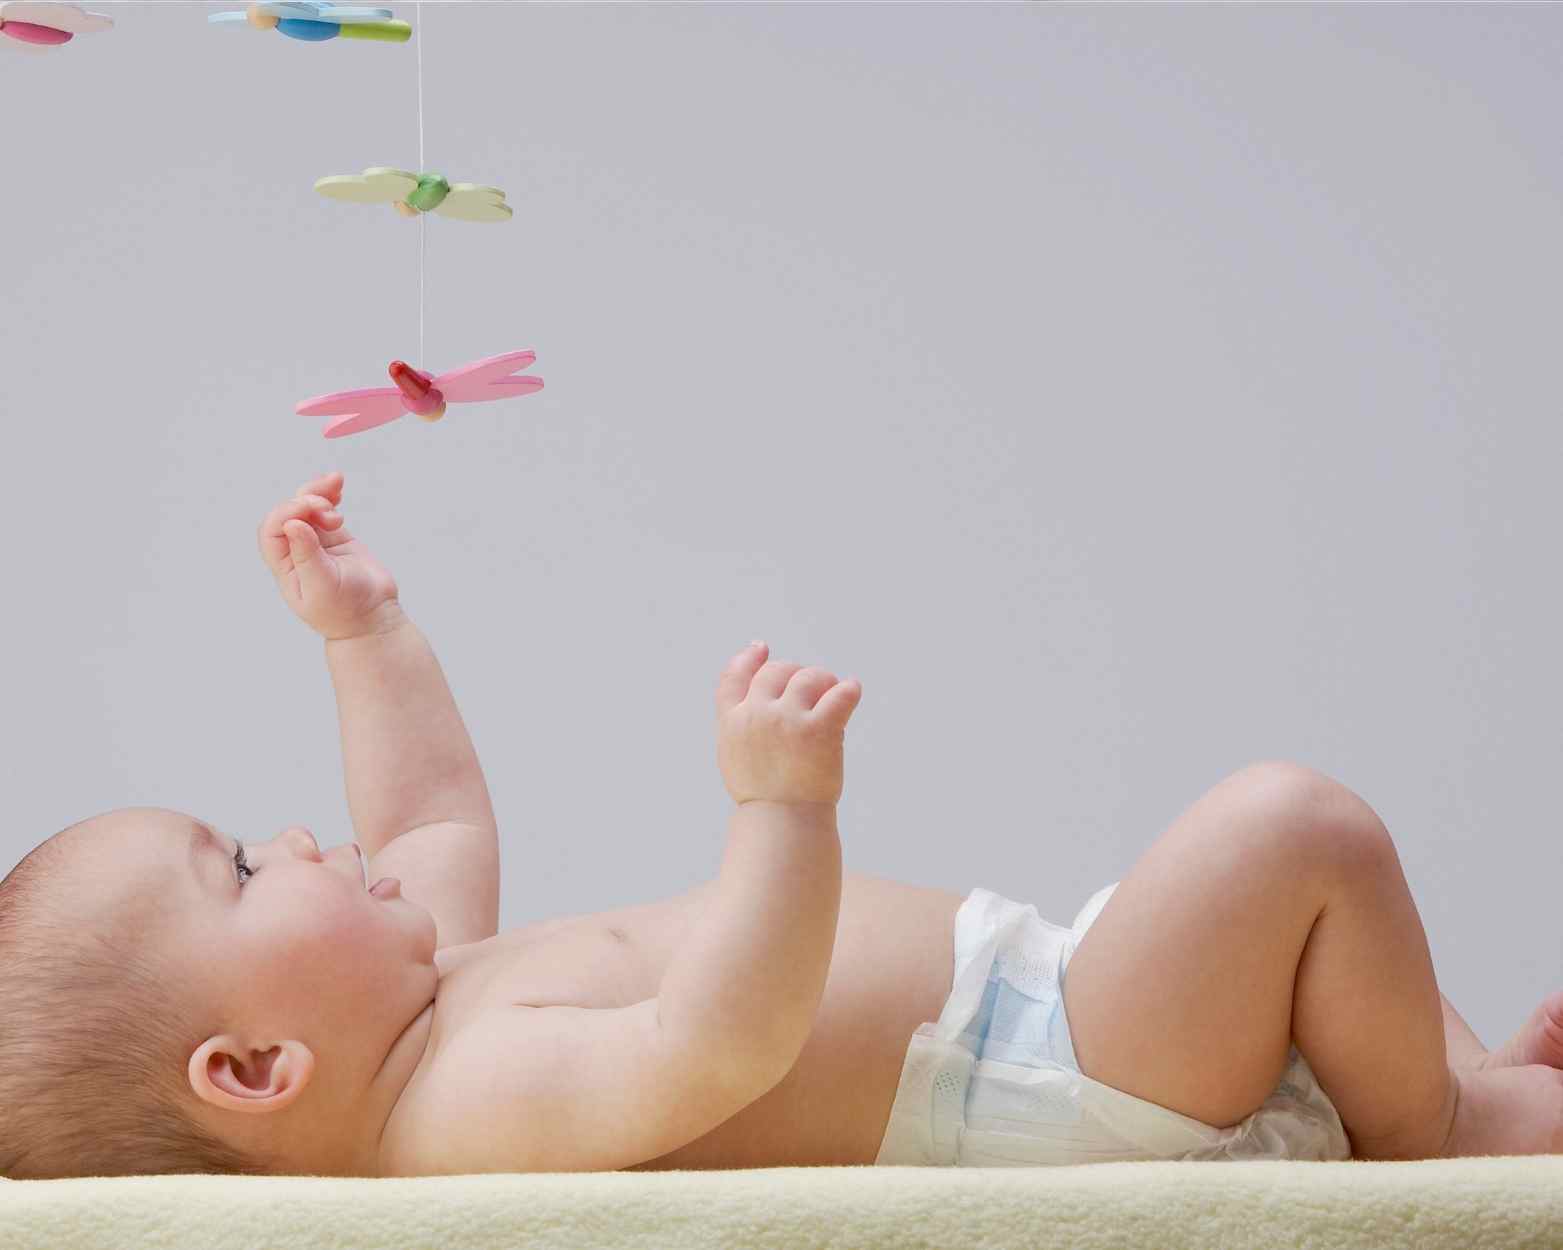 A newborn baby reaching up to play with his developmental newborn toys.